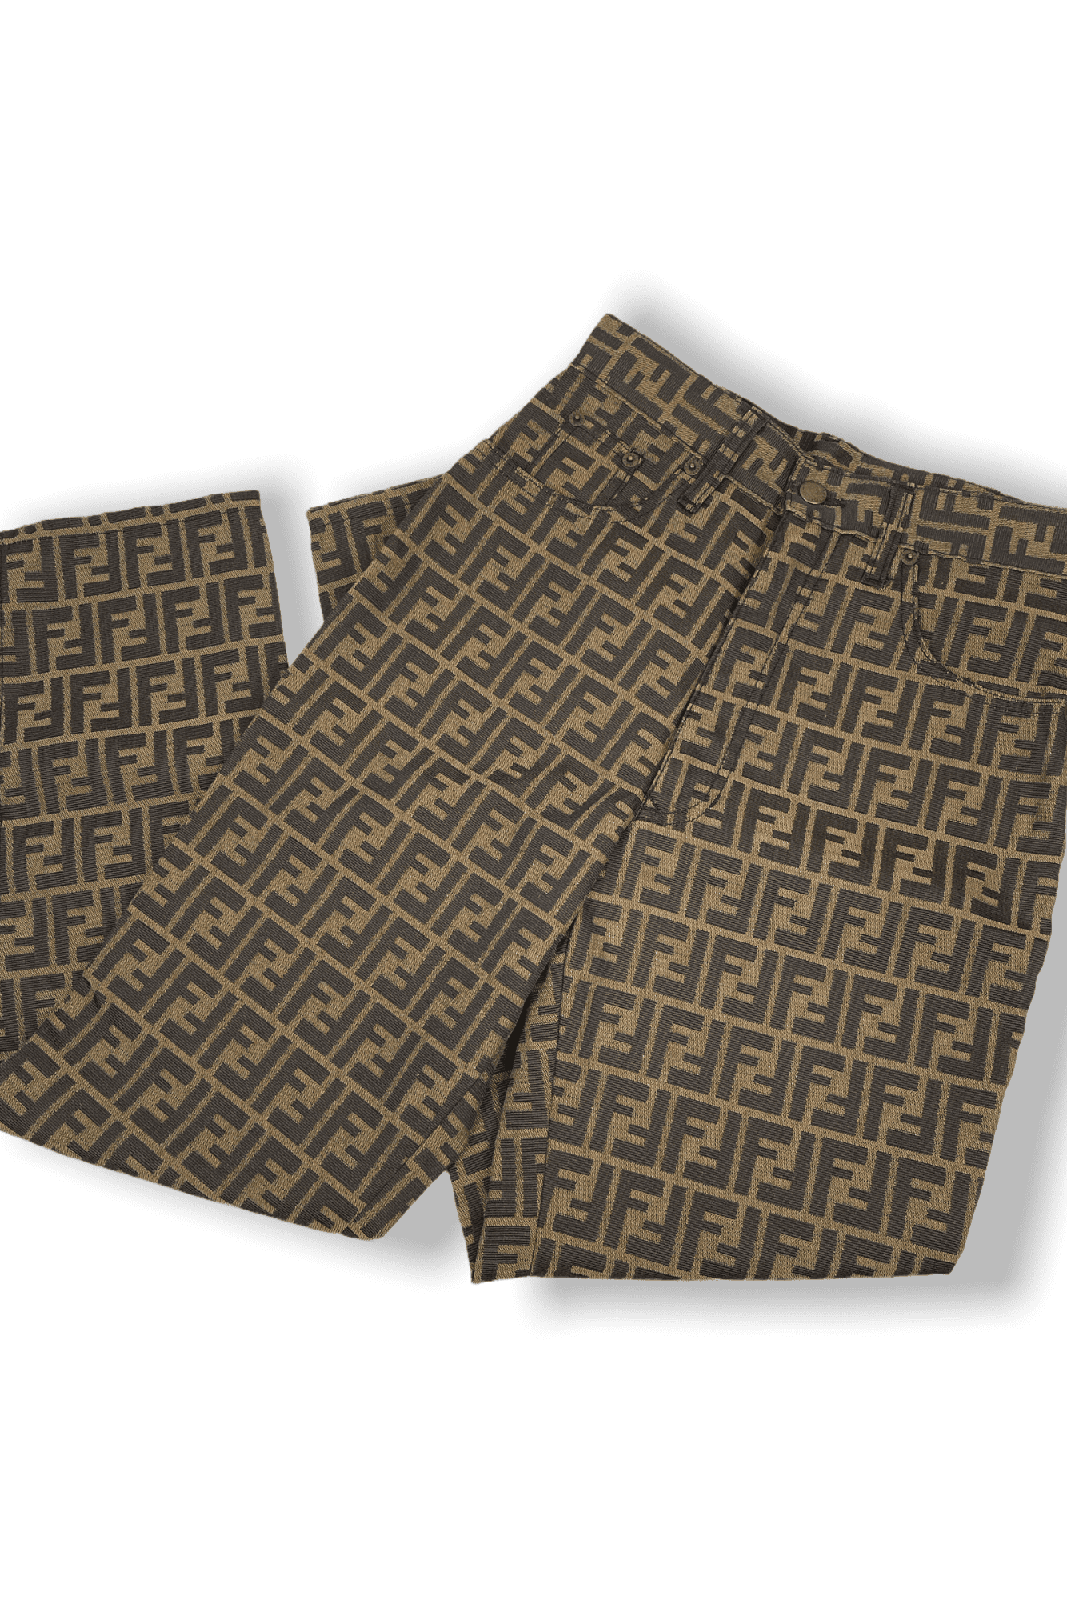 Fendi Zucca Vintage Pants-Fendi Zucca Vintage Pants Size-RELOVE